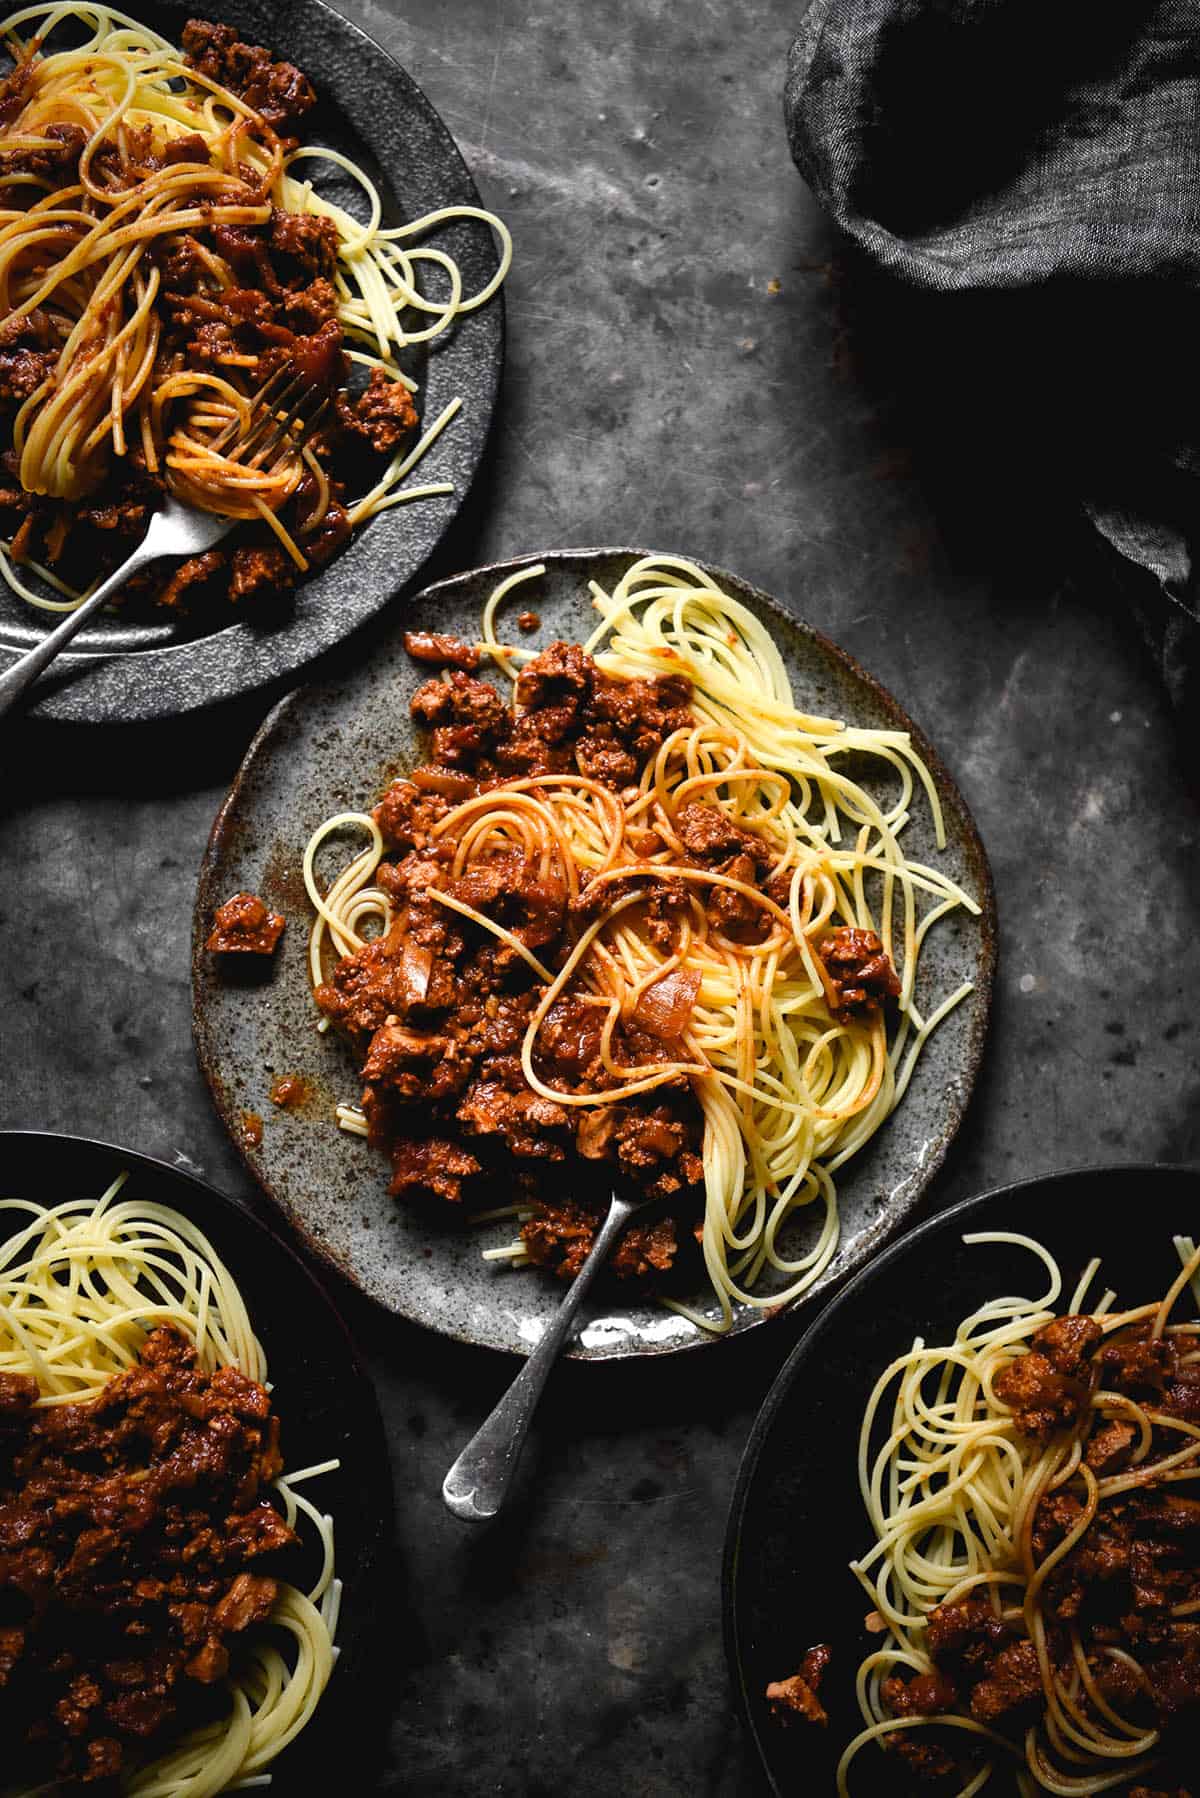 An aerial view of four plates of FODMAP friendly vegan bolognese on dark blue ceramic plates against a dark blue steel backdrop